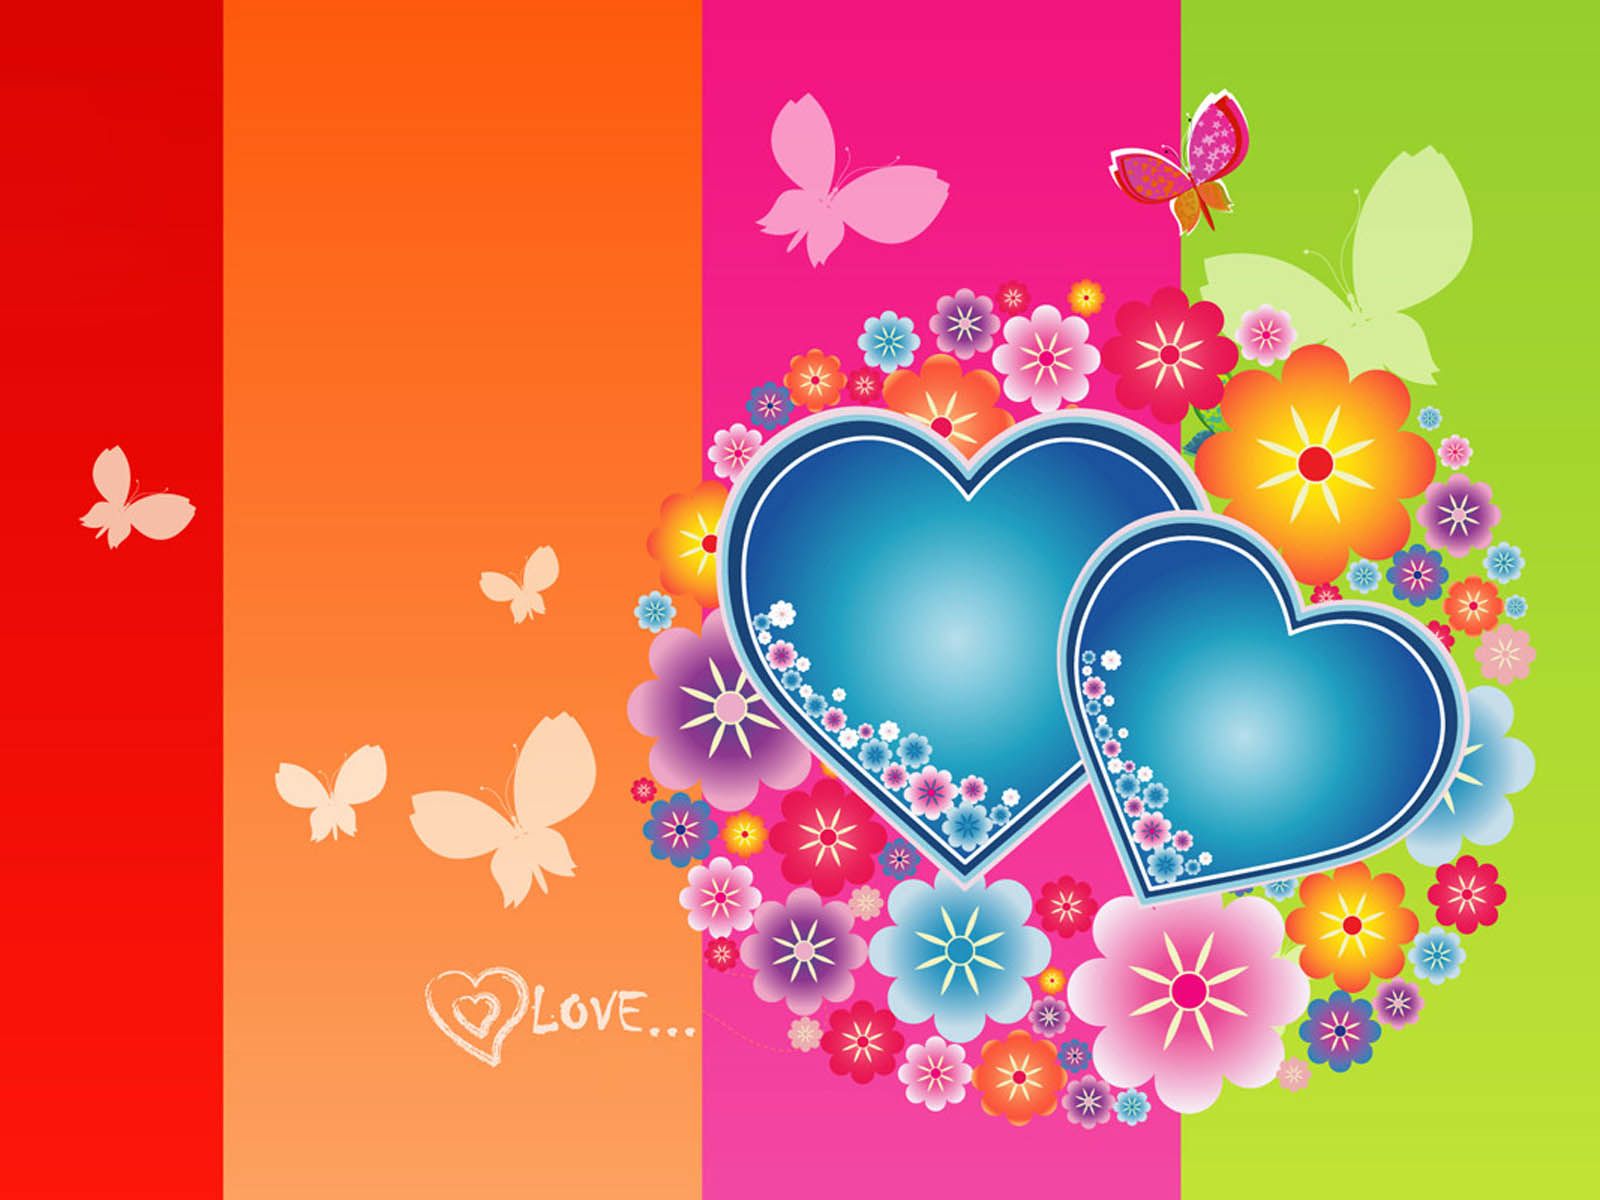 Love Hearts Wallpapers HD Pictures | Live HD Wallpaper HQ Pictures ...